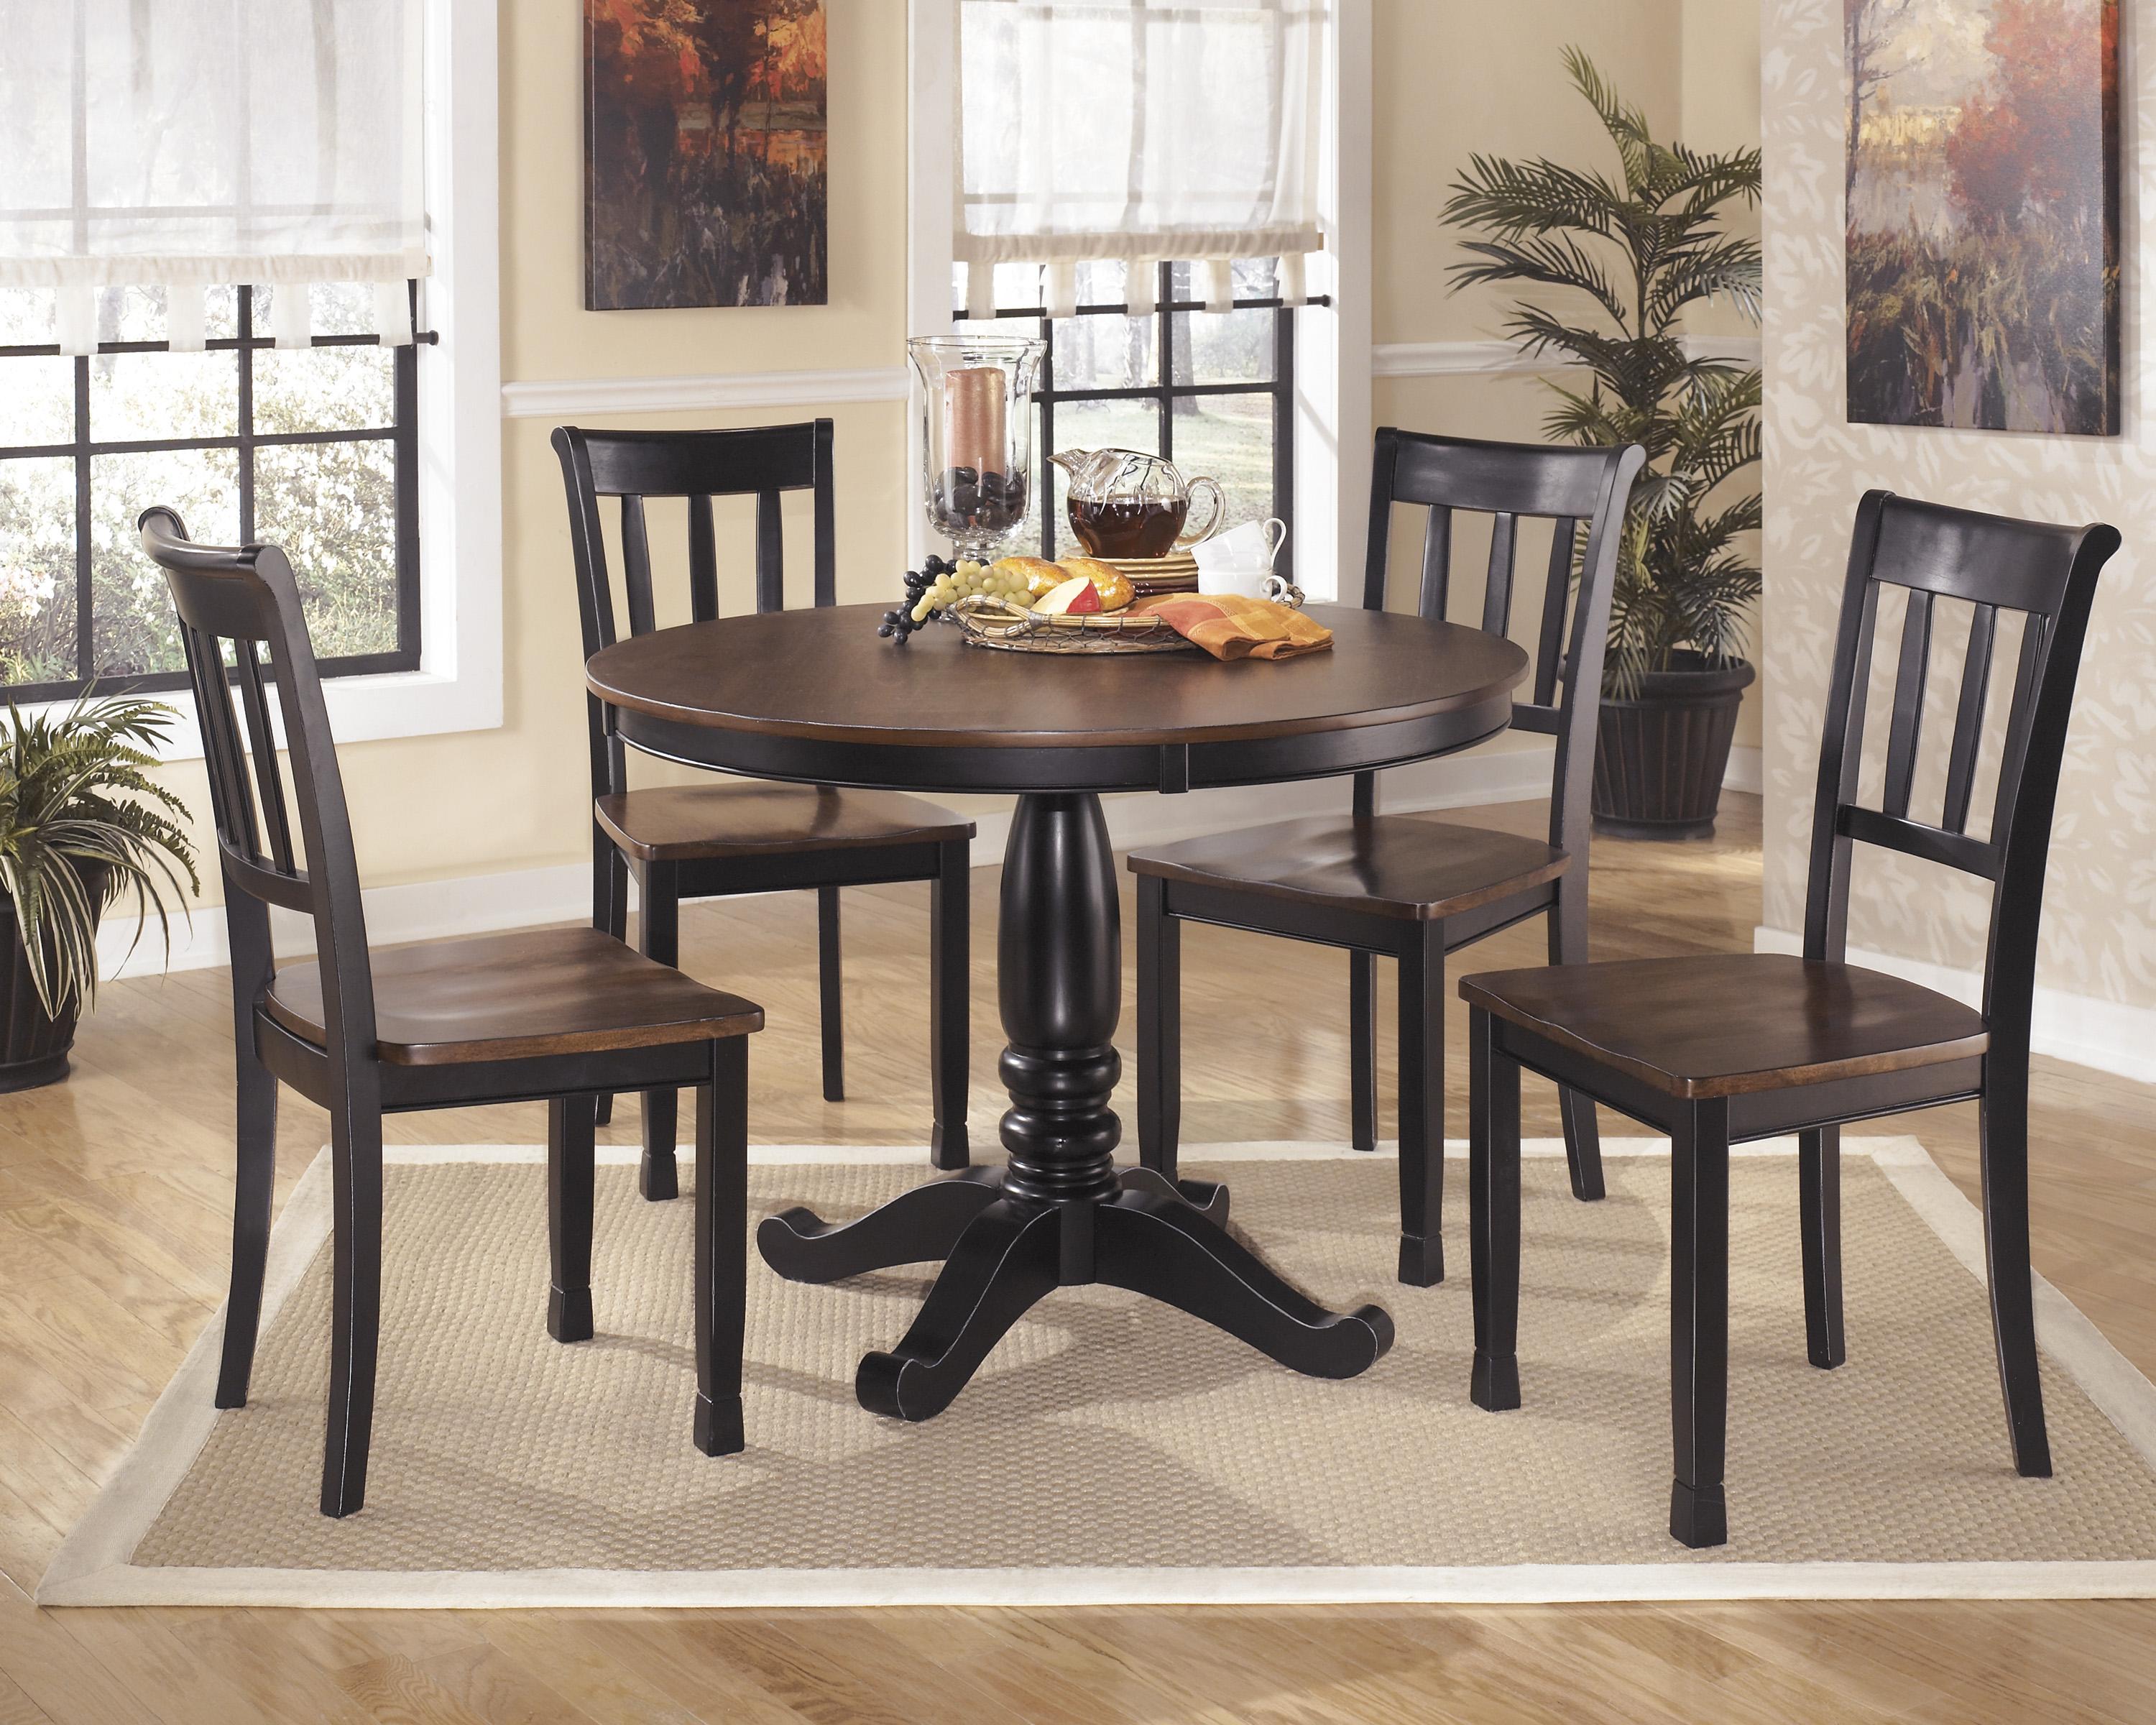 

    
Ashley Owingsville D580 Dining Room Set 5pcs in Black/Brown Round Table
